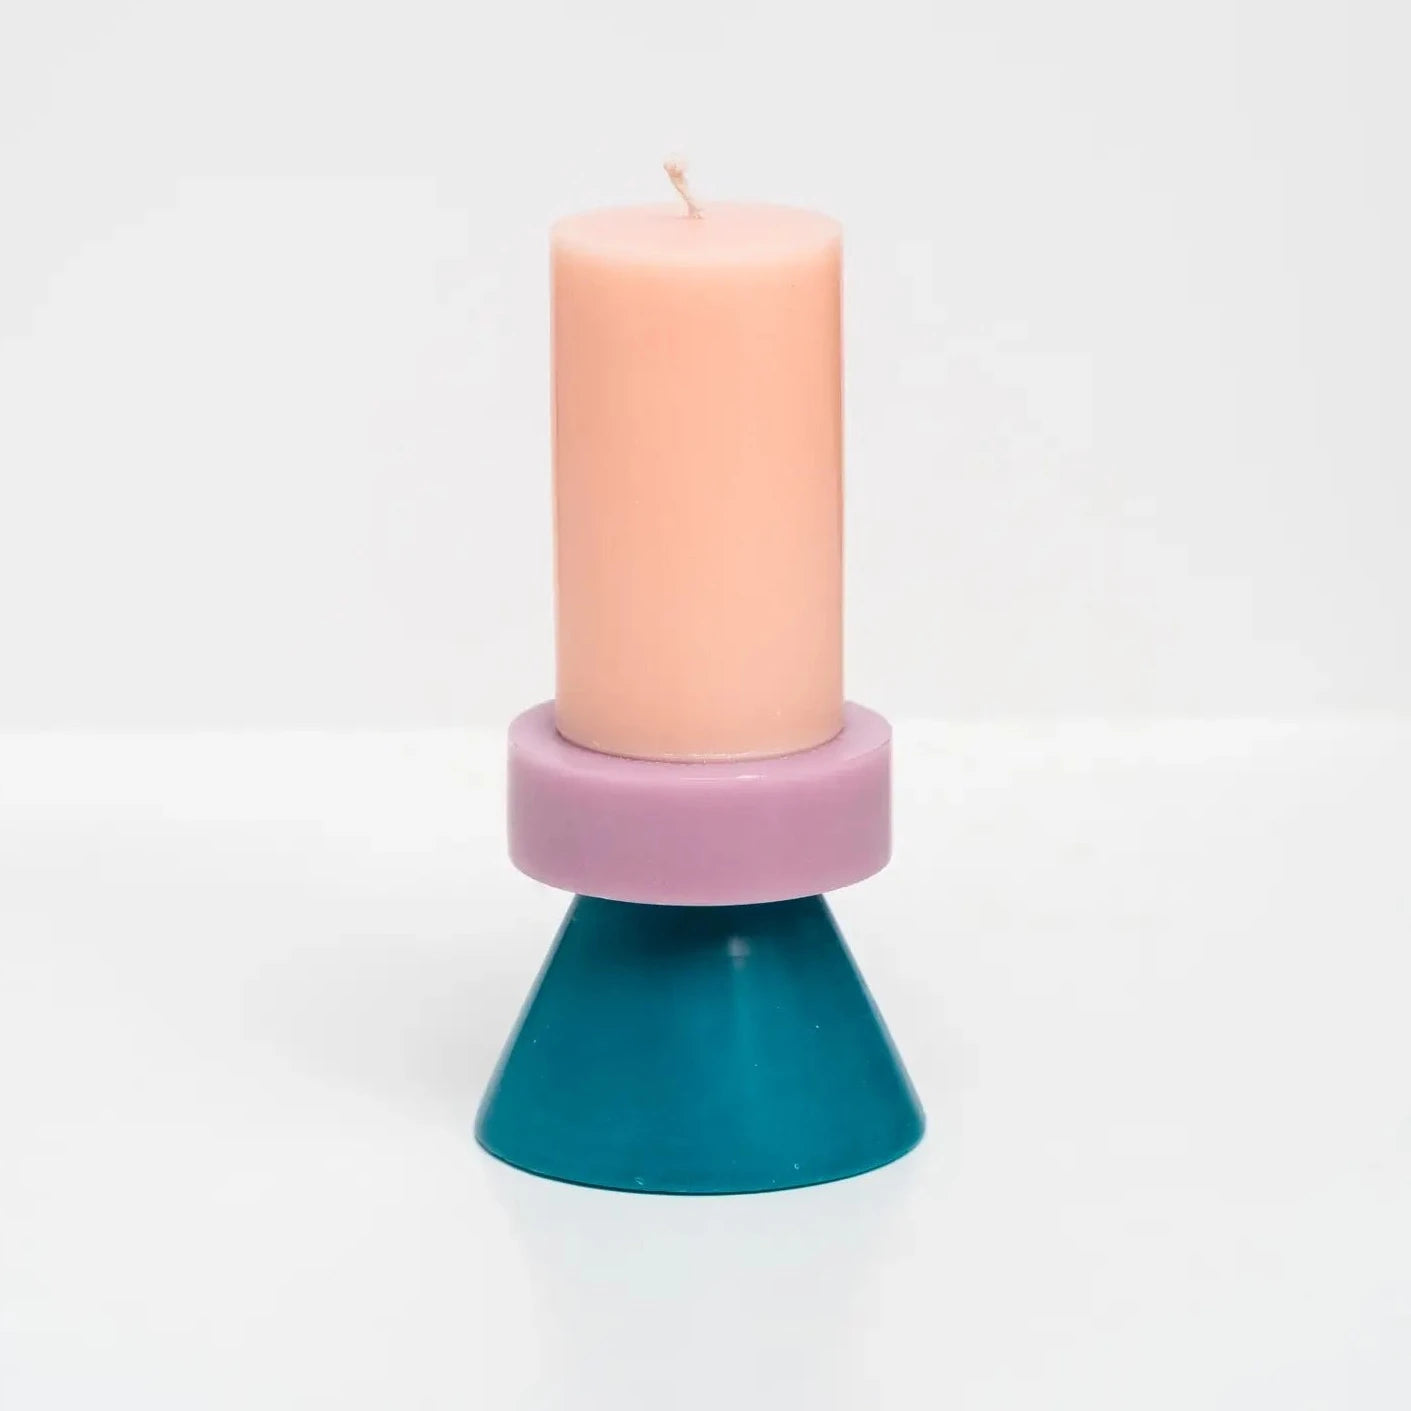 Stack Candle - tall - blush / lilac / teal